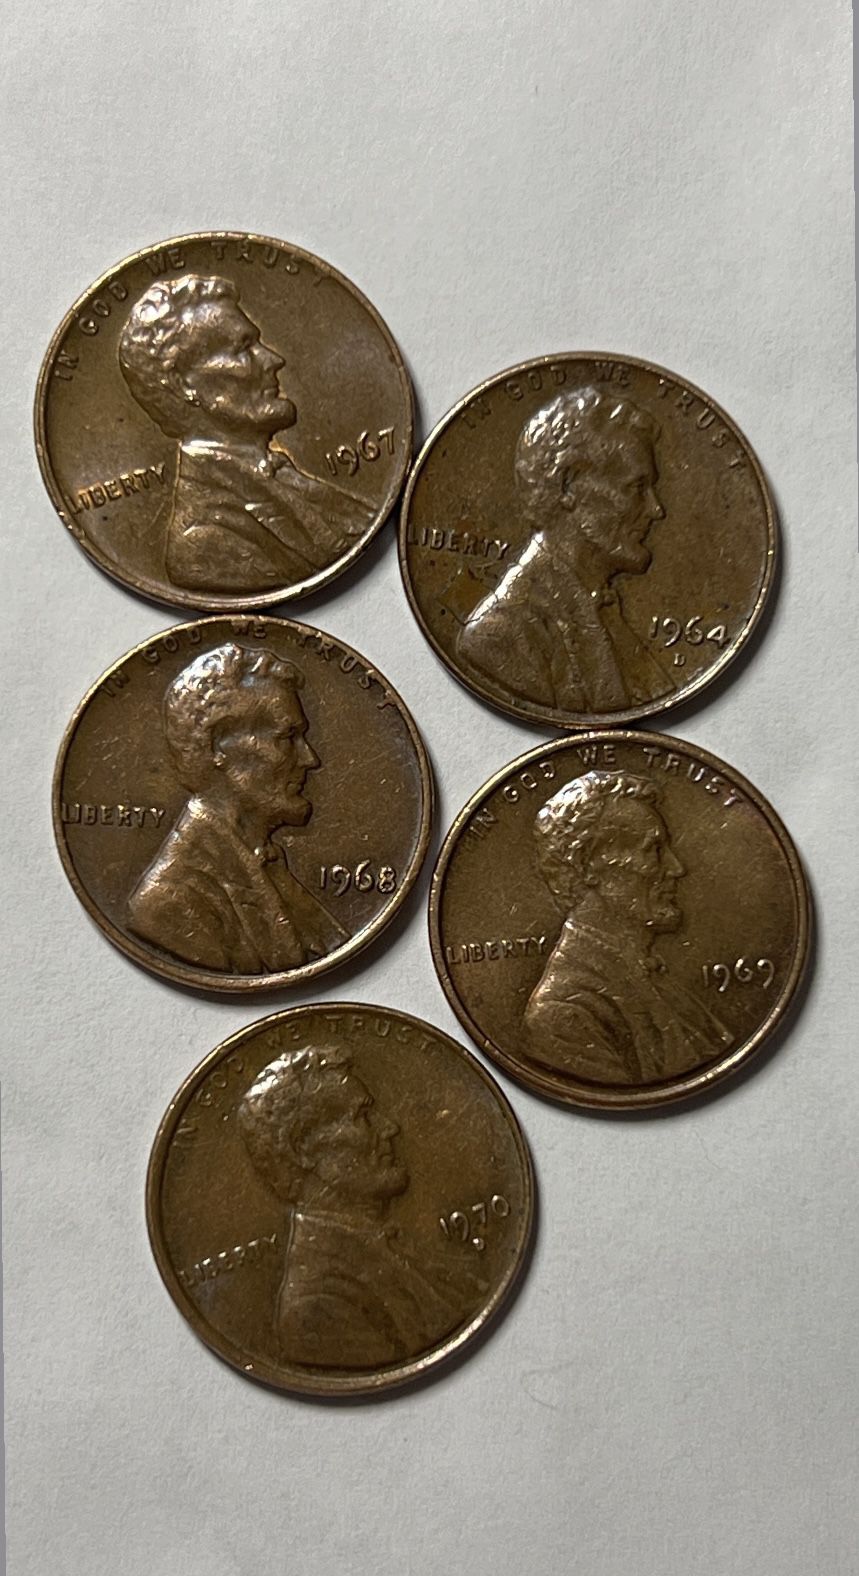  Old Pennies 64-67-68-69-70. (64 and 70 with mark)